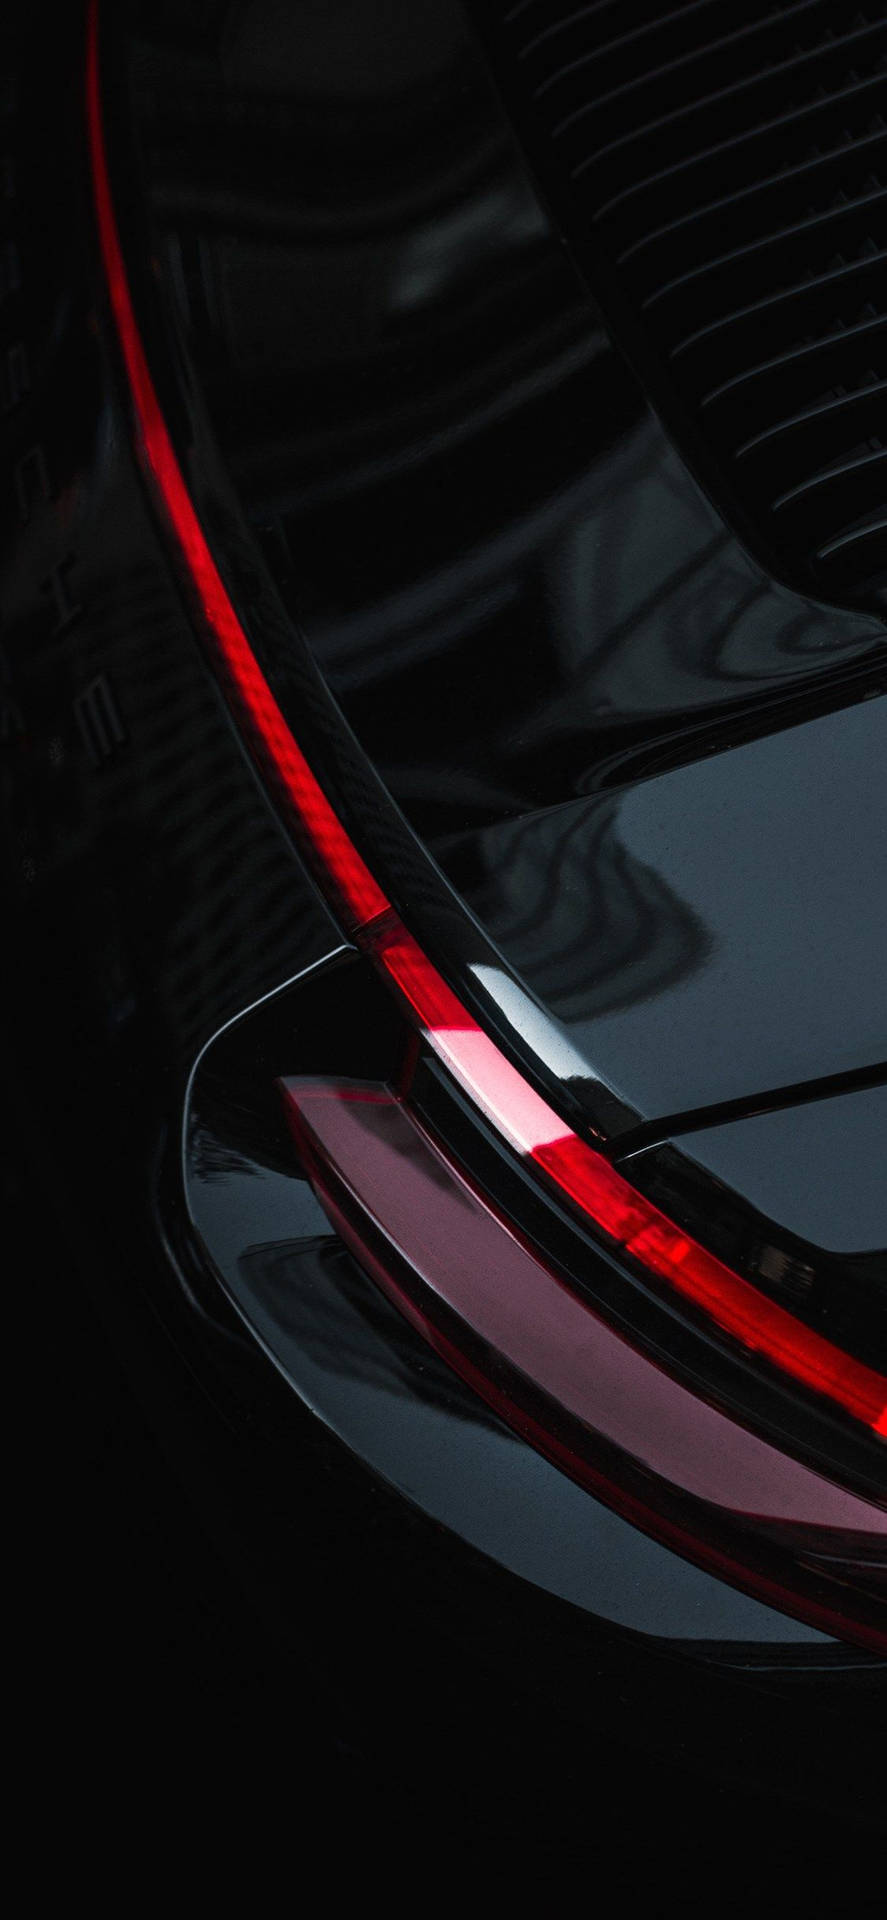 Reflecting the Luxury of the iPhone XR with a Black Car on a Fiery Road. Wallpaper